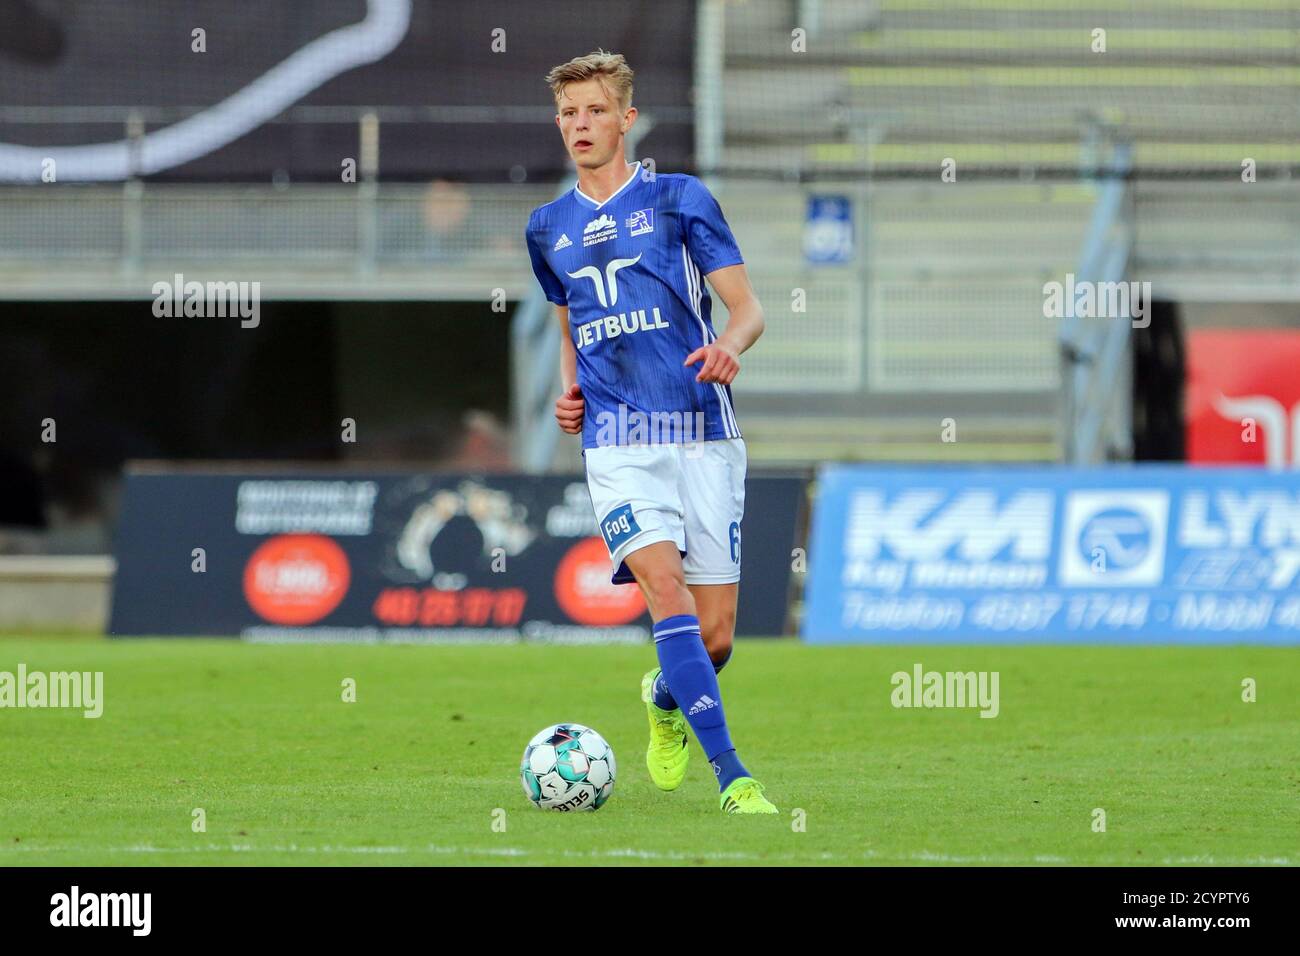 Lyngby, Denmark. 22nd, June 2020. Frederik Winther (6) of Lyngby seen during the 3F Superliga match between Lyngby Boldklub and Odense Boldklub at Lyngby Stadium. (Photo credit: Gonzales Photo - Rune Mathiesen). Stock Photo